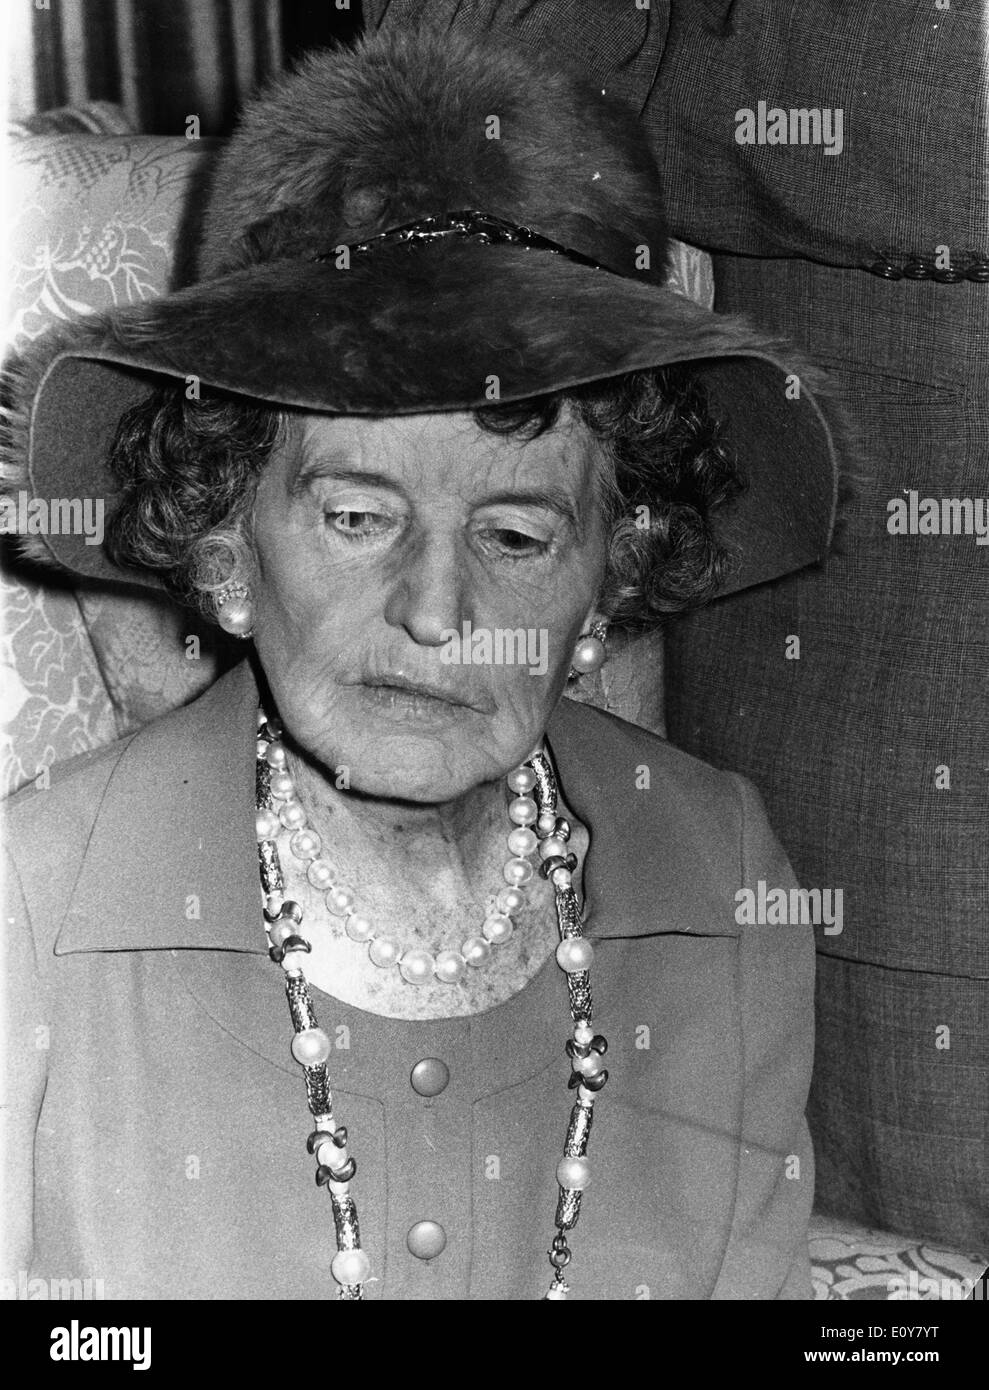 Jan. 01, 1969 - London, England, United Kingdom - File photo: circa 1969. The Kennedy family is a prominent Irish-American family in American politics and government descending from the marriage of JOSEPH P. KENNEDY and ROSE FITZGERALD KENNEDY (pictured). The predominantly Democratic family is known for its US-style political liberalism. The best known Kennedy is the late President of the United States John F. Kennedy. The Kennedys are often compared to the Adams, Bush, and Taft families as among the most influential American political families Stock Photo